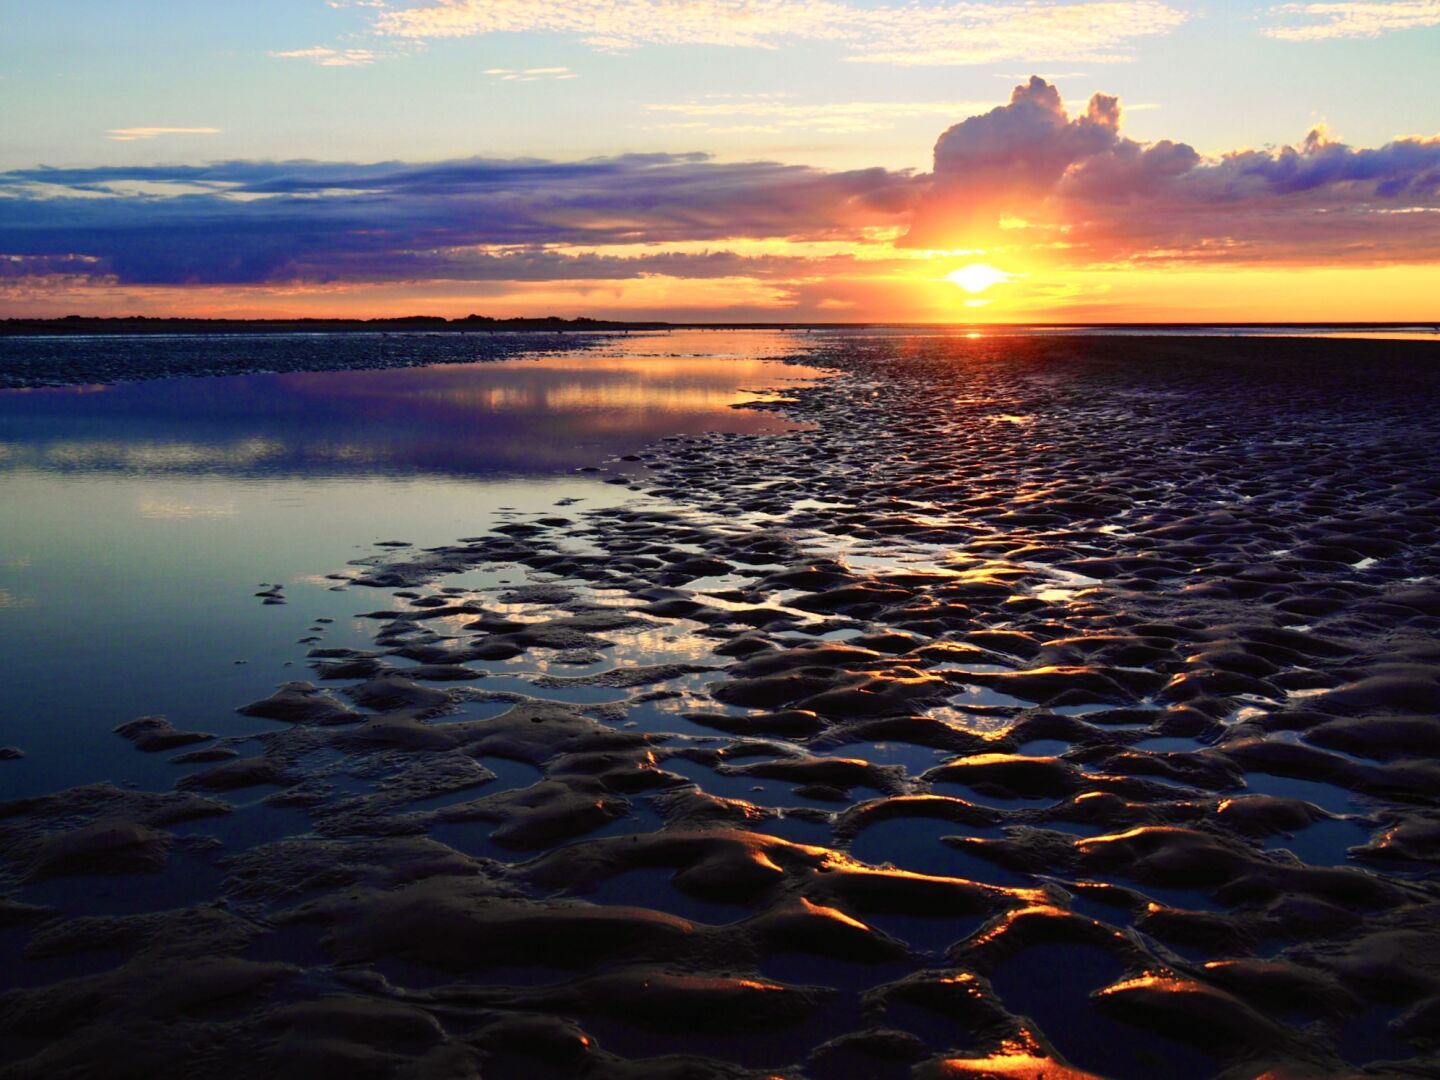 Sunset at the mouth of the Somme

#picardie #france #sunset #sunsetphotography #fotomontag #photography #somme #seascape